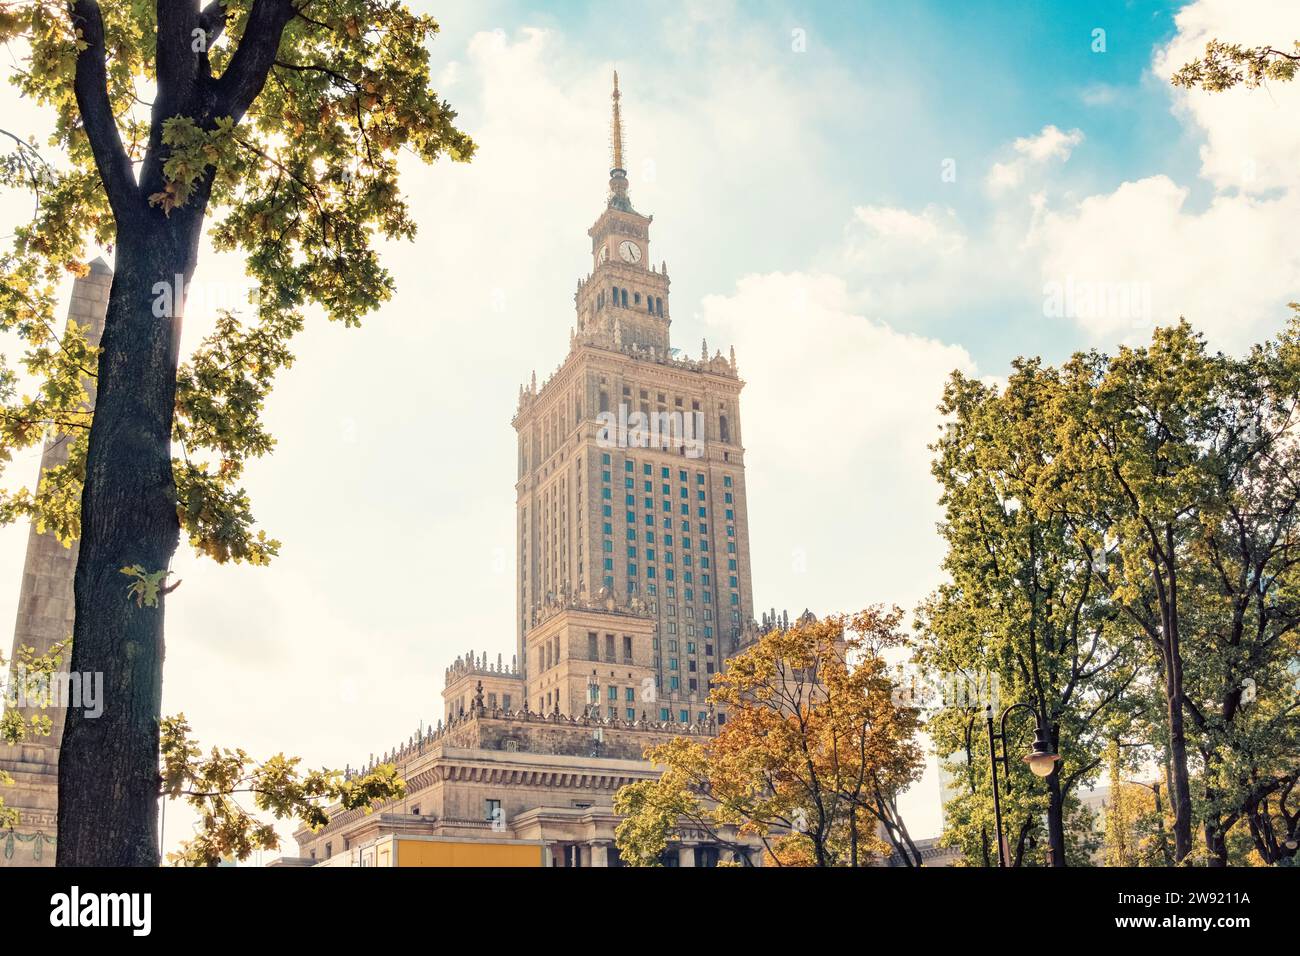 Poland, Mazowieckie, Warsaw, Palace of Culture and Science seen from park Stock Photo